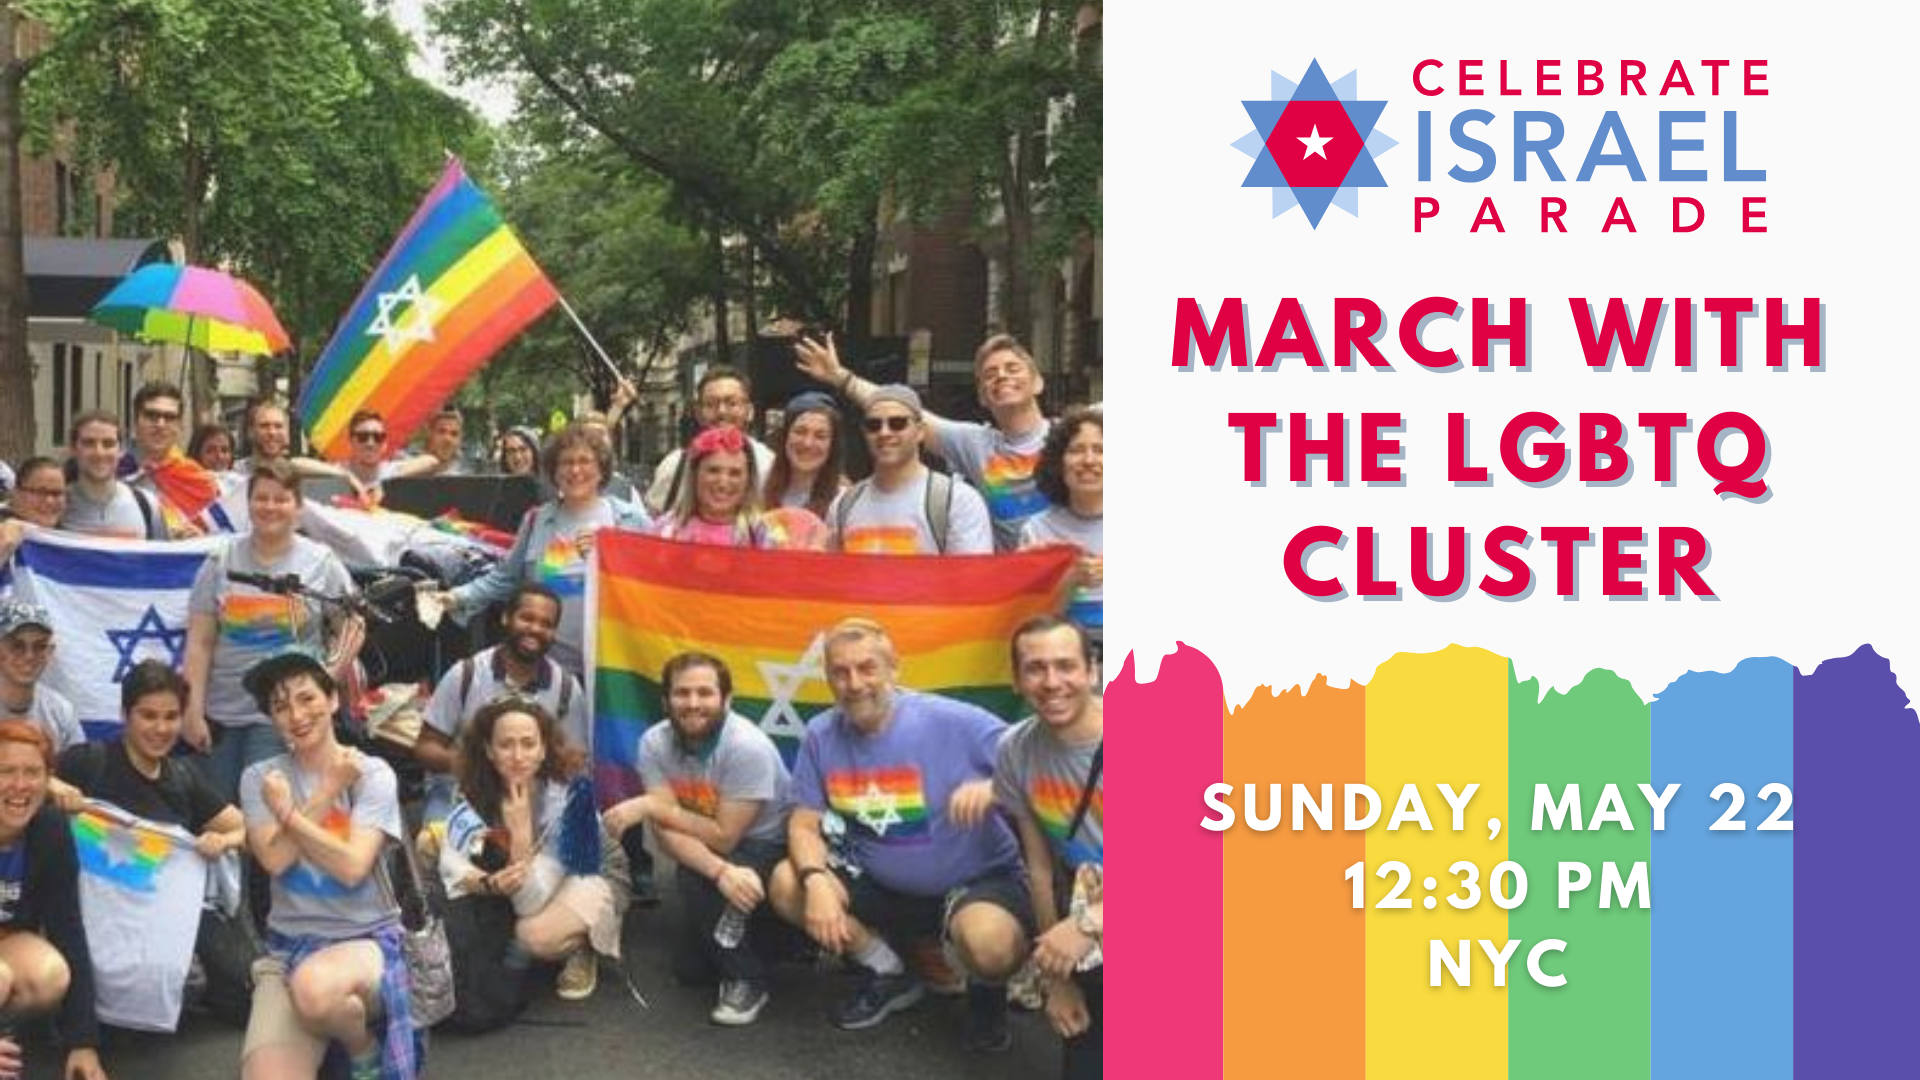 Celebrate Israel Parade | March with the LGBTQ Cluster | Sunday May 22, 12:30 PM, NYC